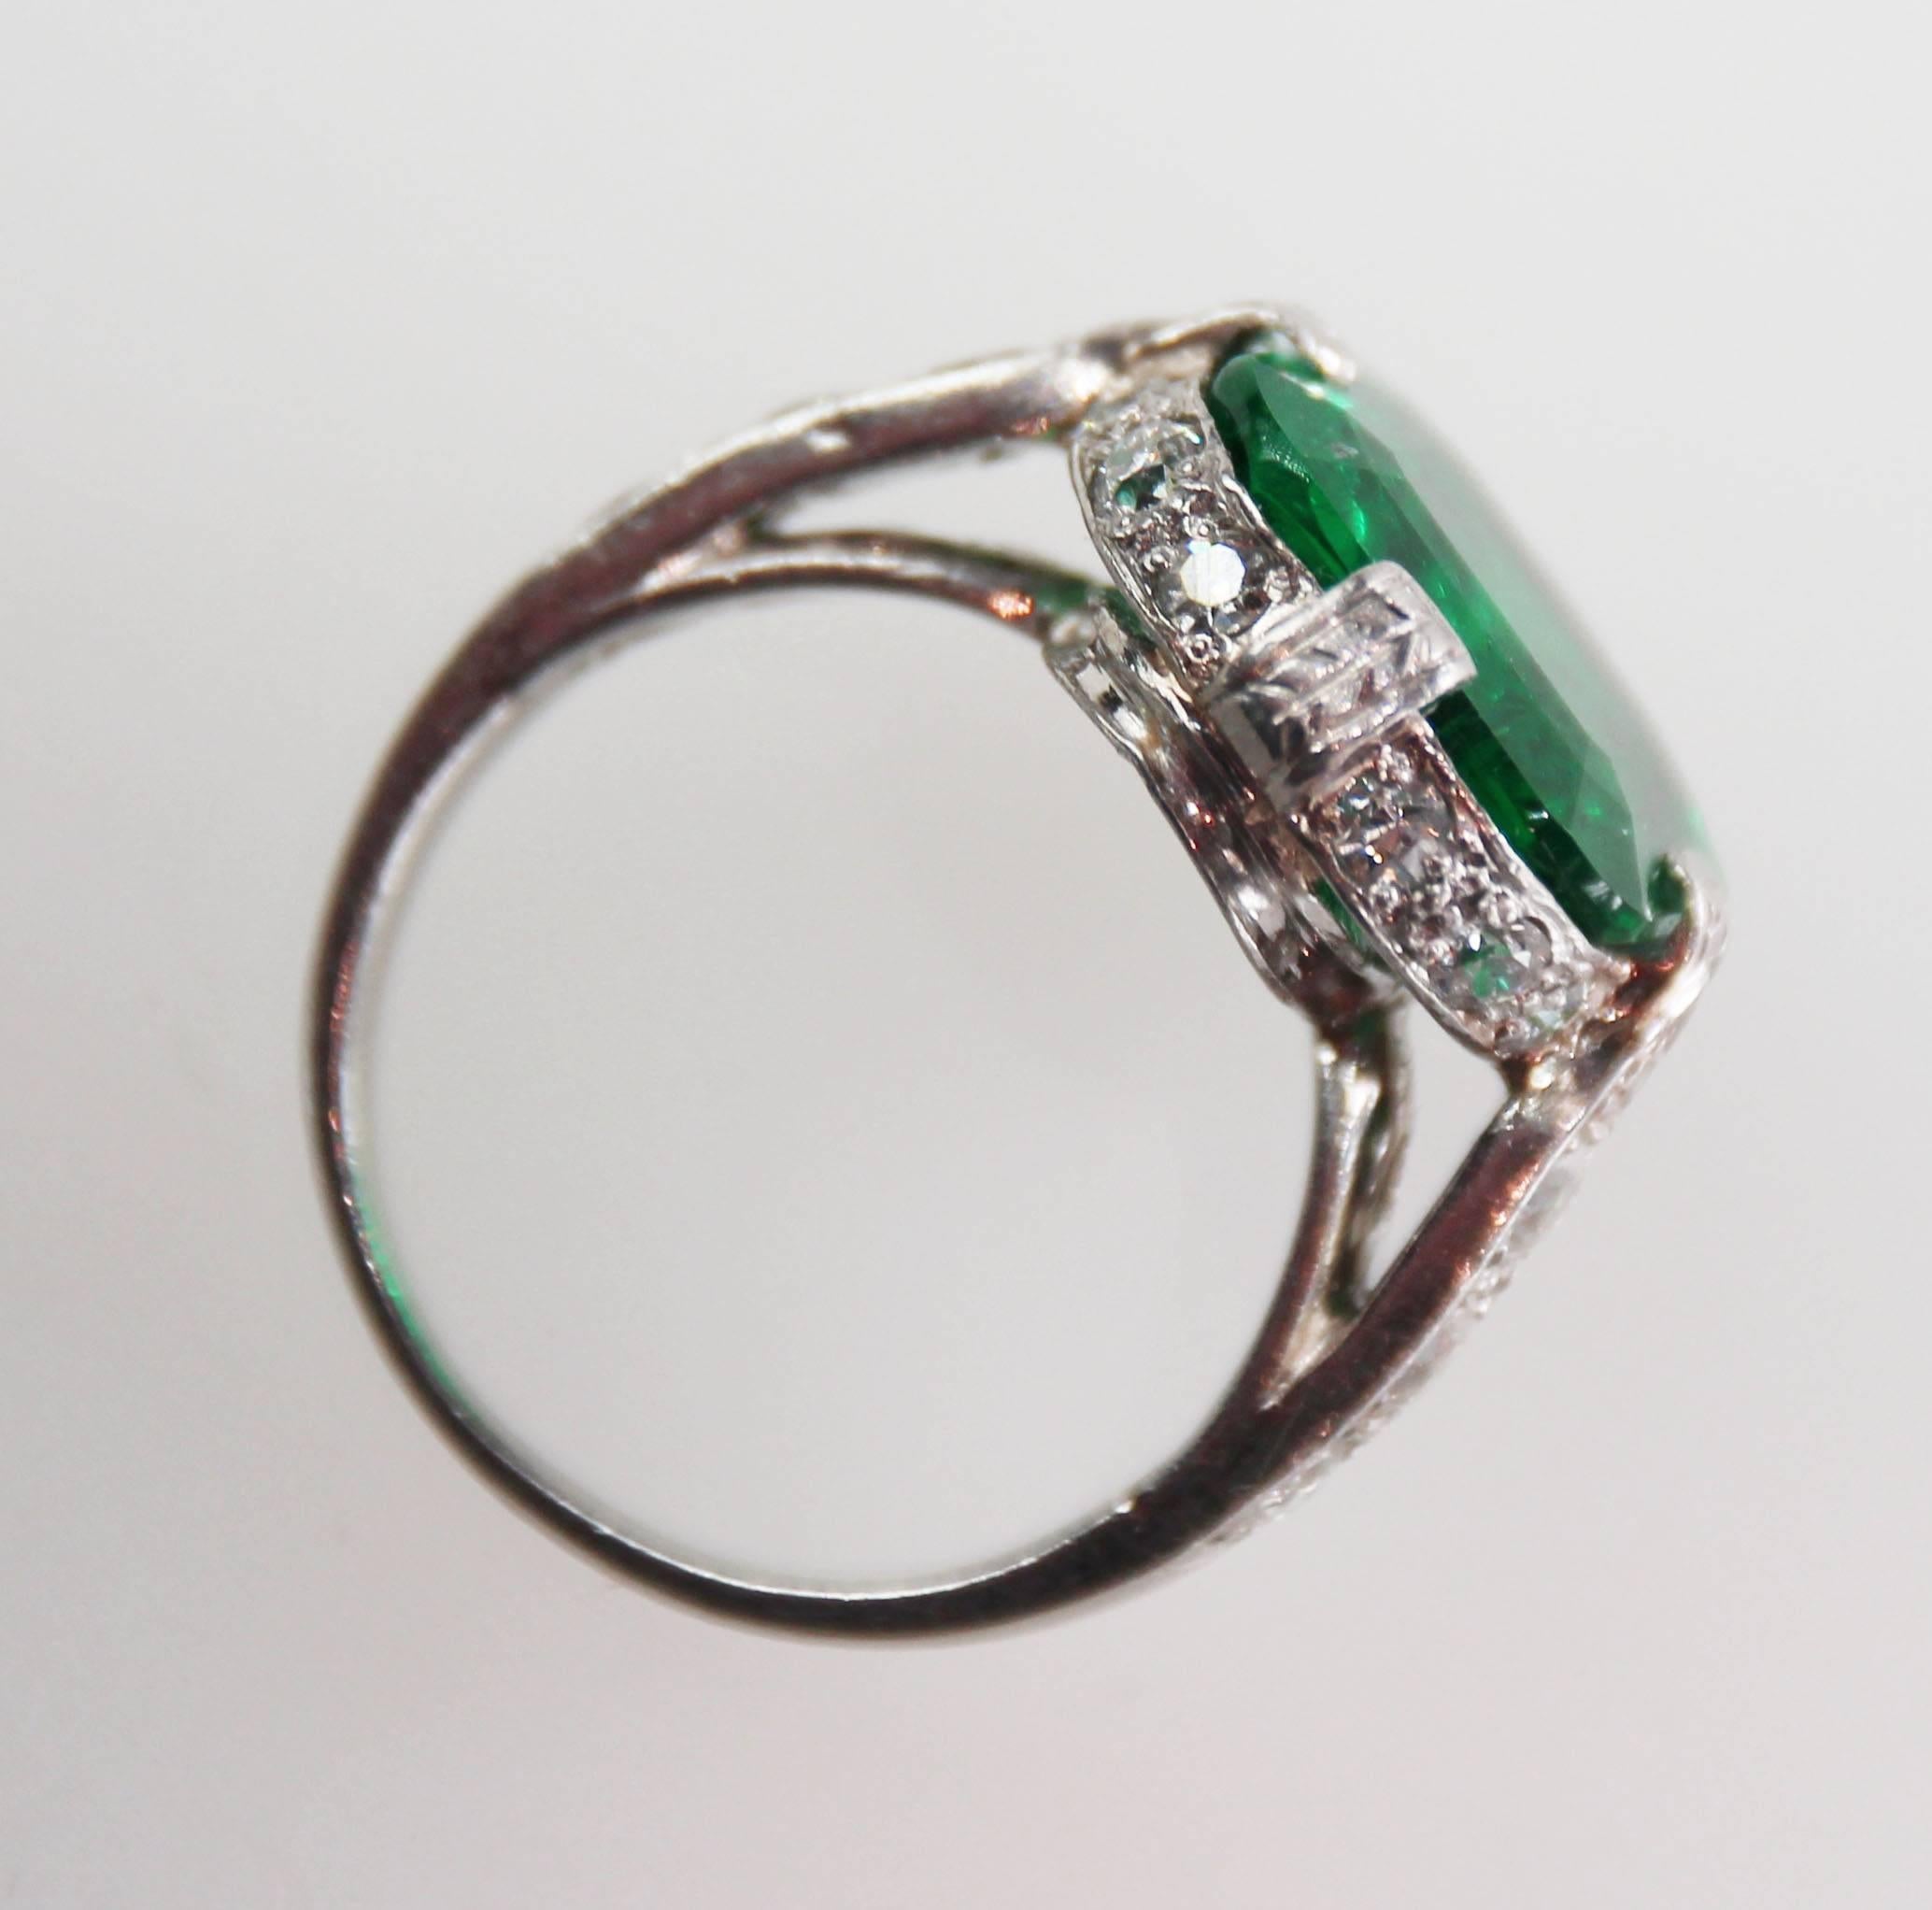 3.95 Carat Colombian No Oil Emerald Diamond Platinum Ring In Good Condition For Sale In Bay Harbor Islands, FL